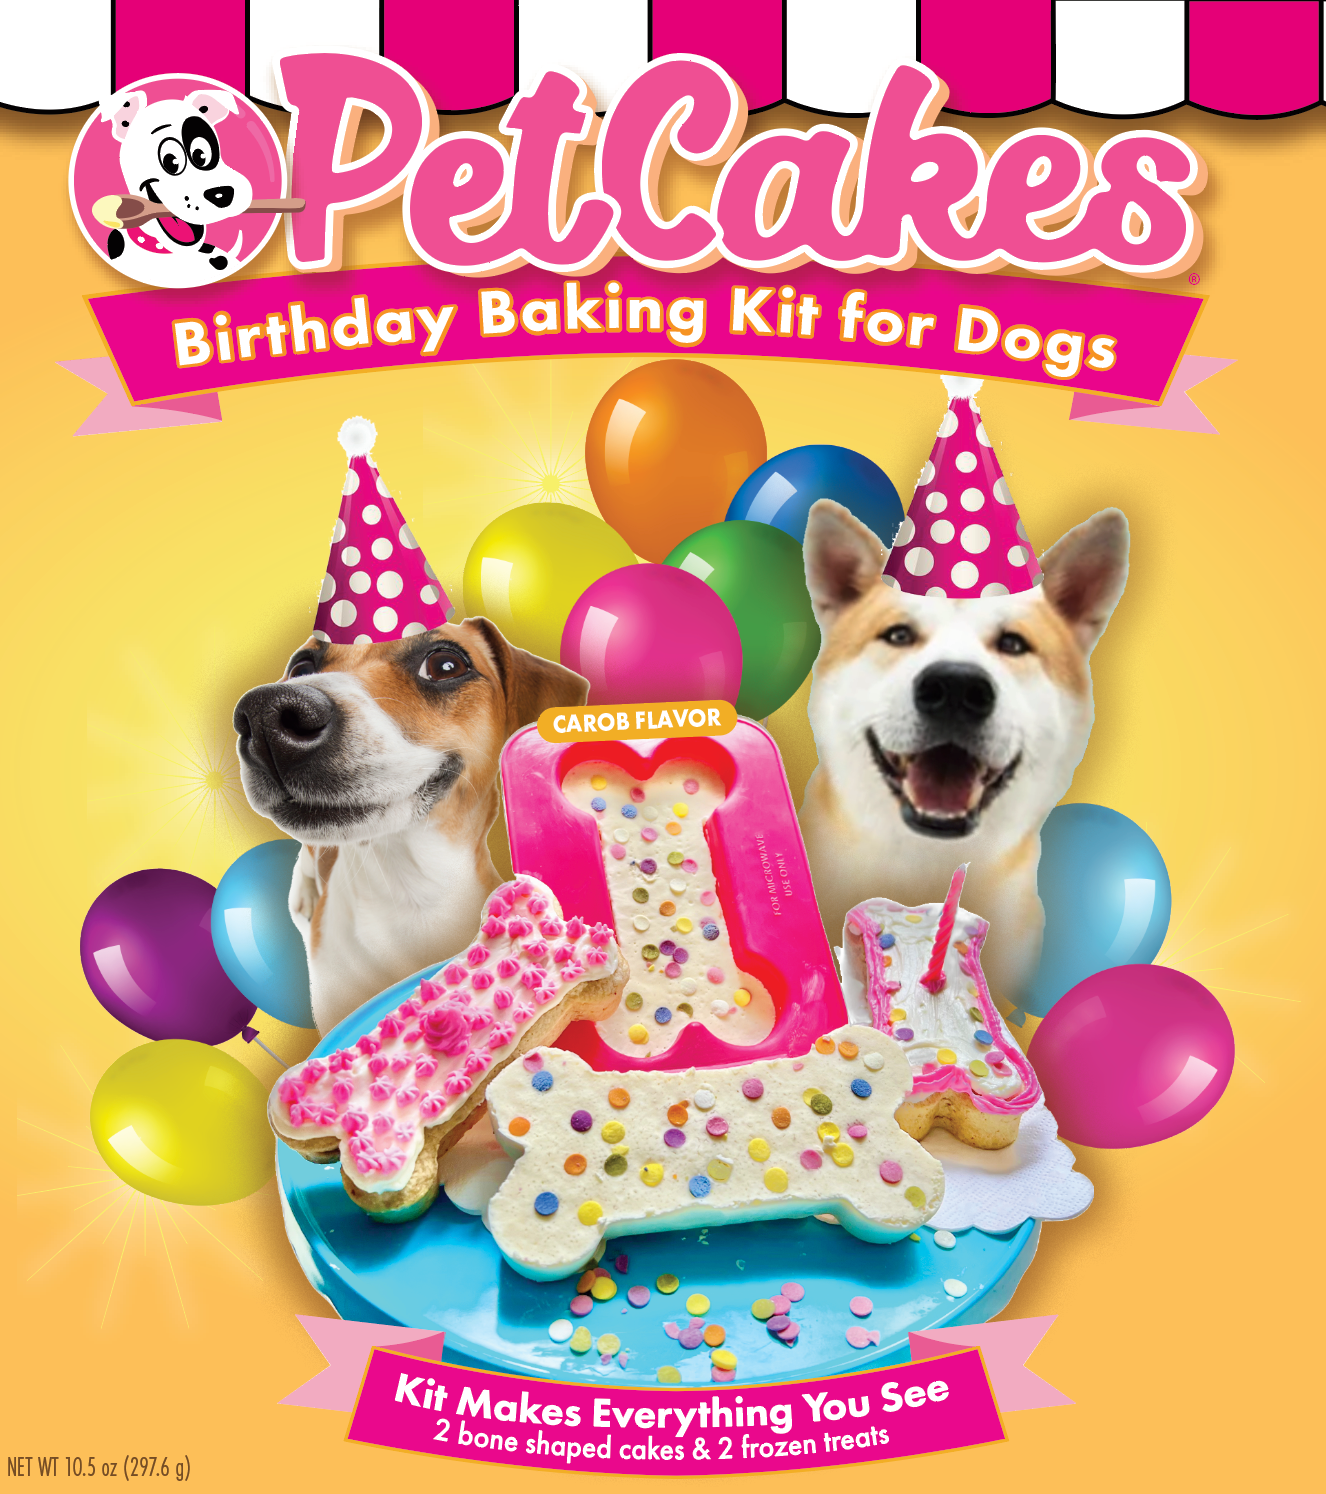 Birthday Baking Kit for Dogs - 2 cakes + 2 ice cream + candle